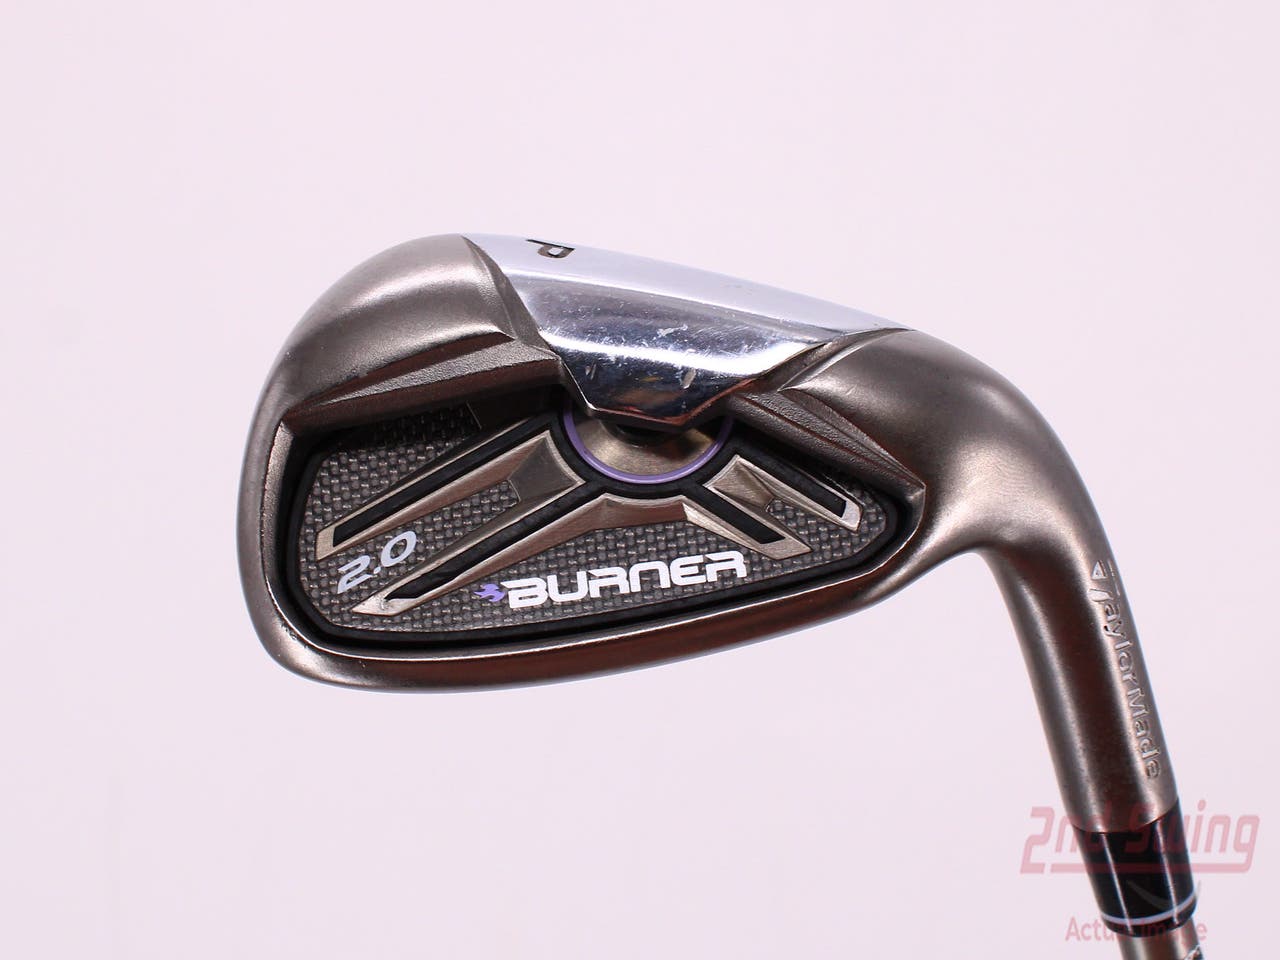 TaylorMade Burner 2.0 Single Iron Pitching Wedge PW TM Reax Superfast 55 Lady Graphite Ladies Right Handed 34.5in